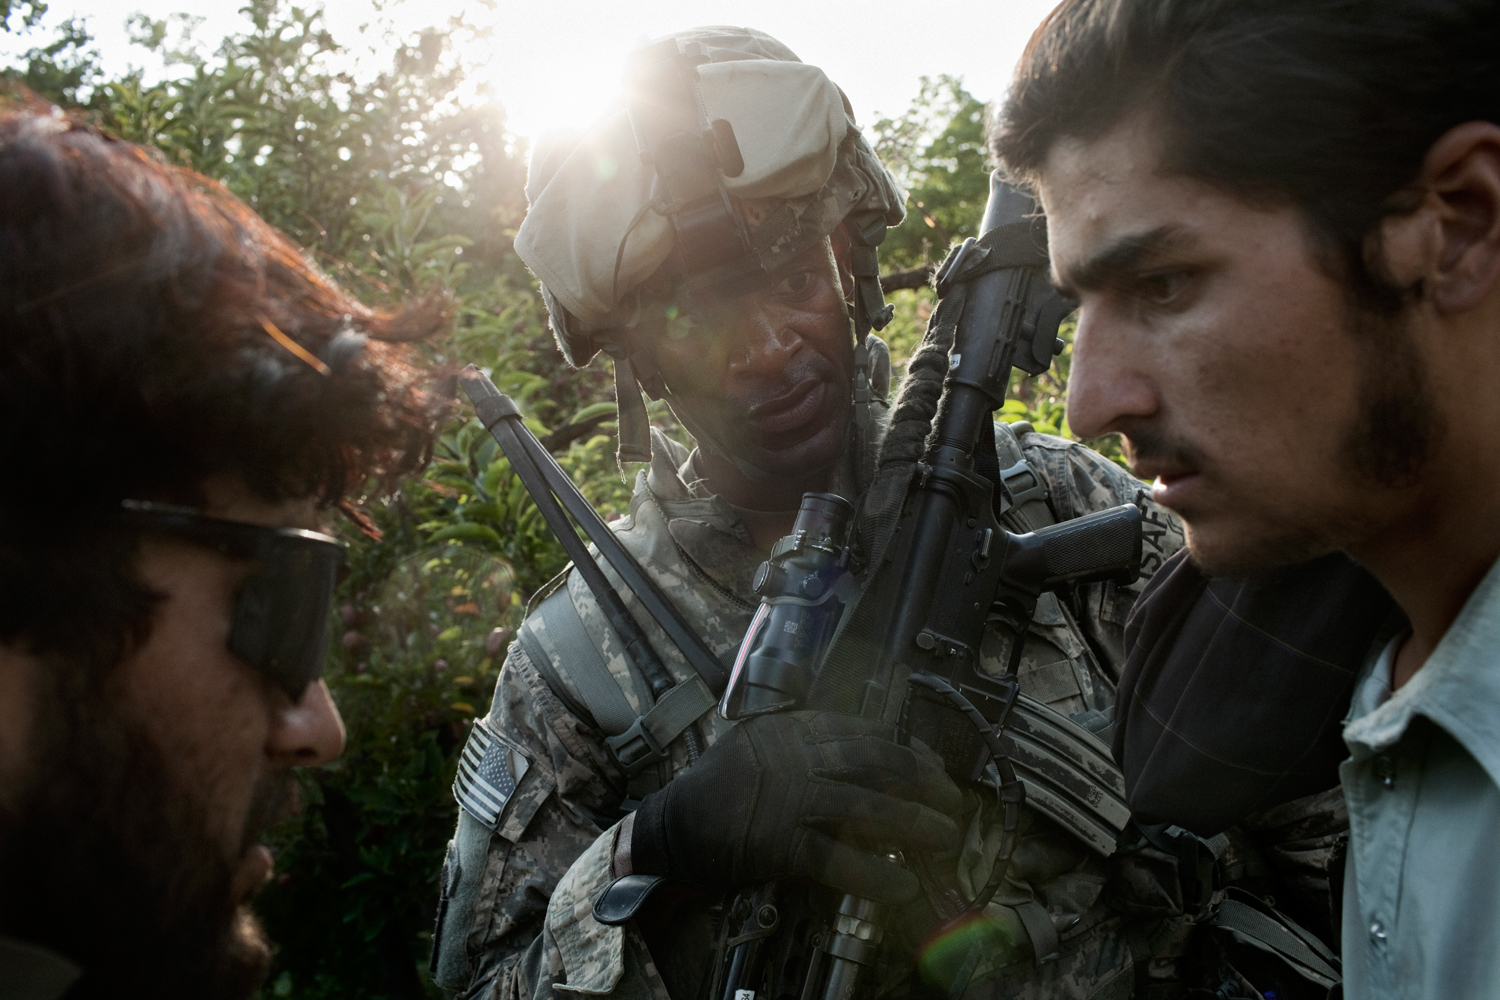  A U.S. Army soldier and Afghan interpreter question a local villager in the Tangi Valley, Wardak Province, Afghanistan. 